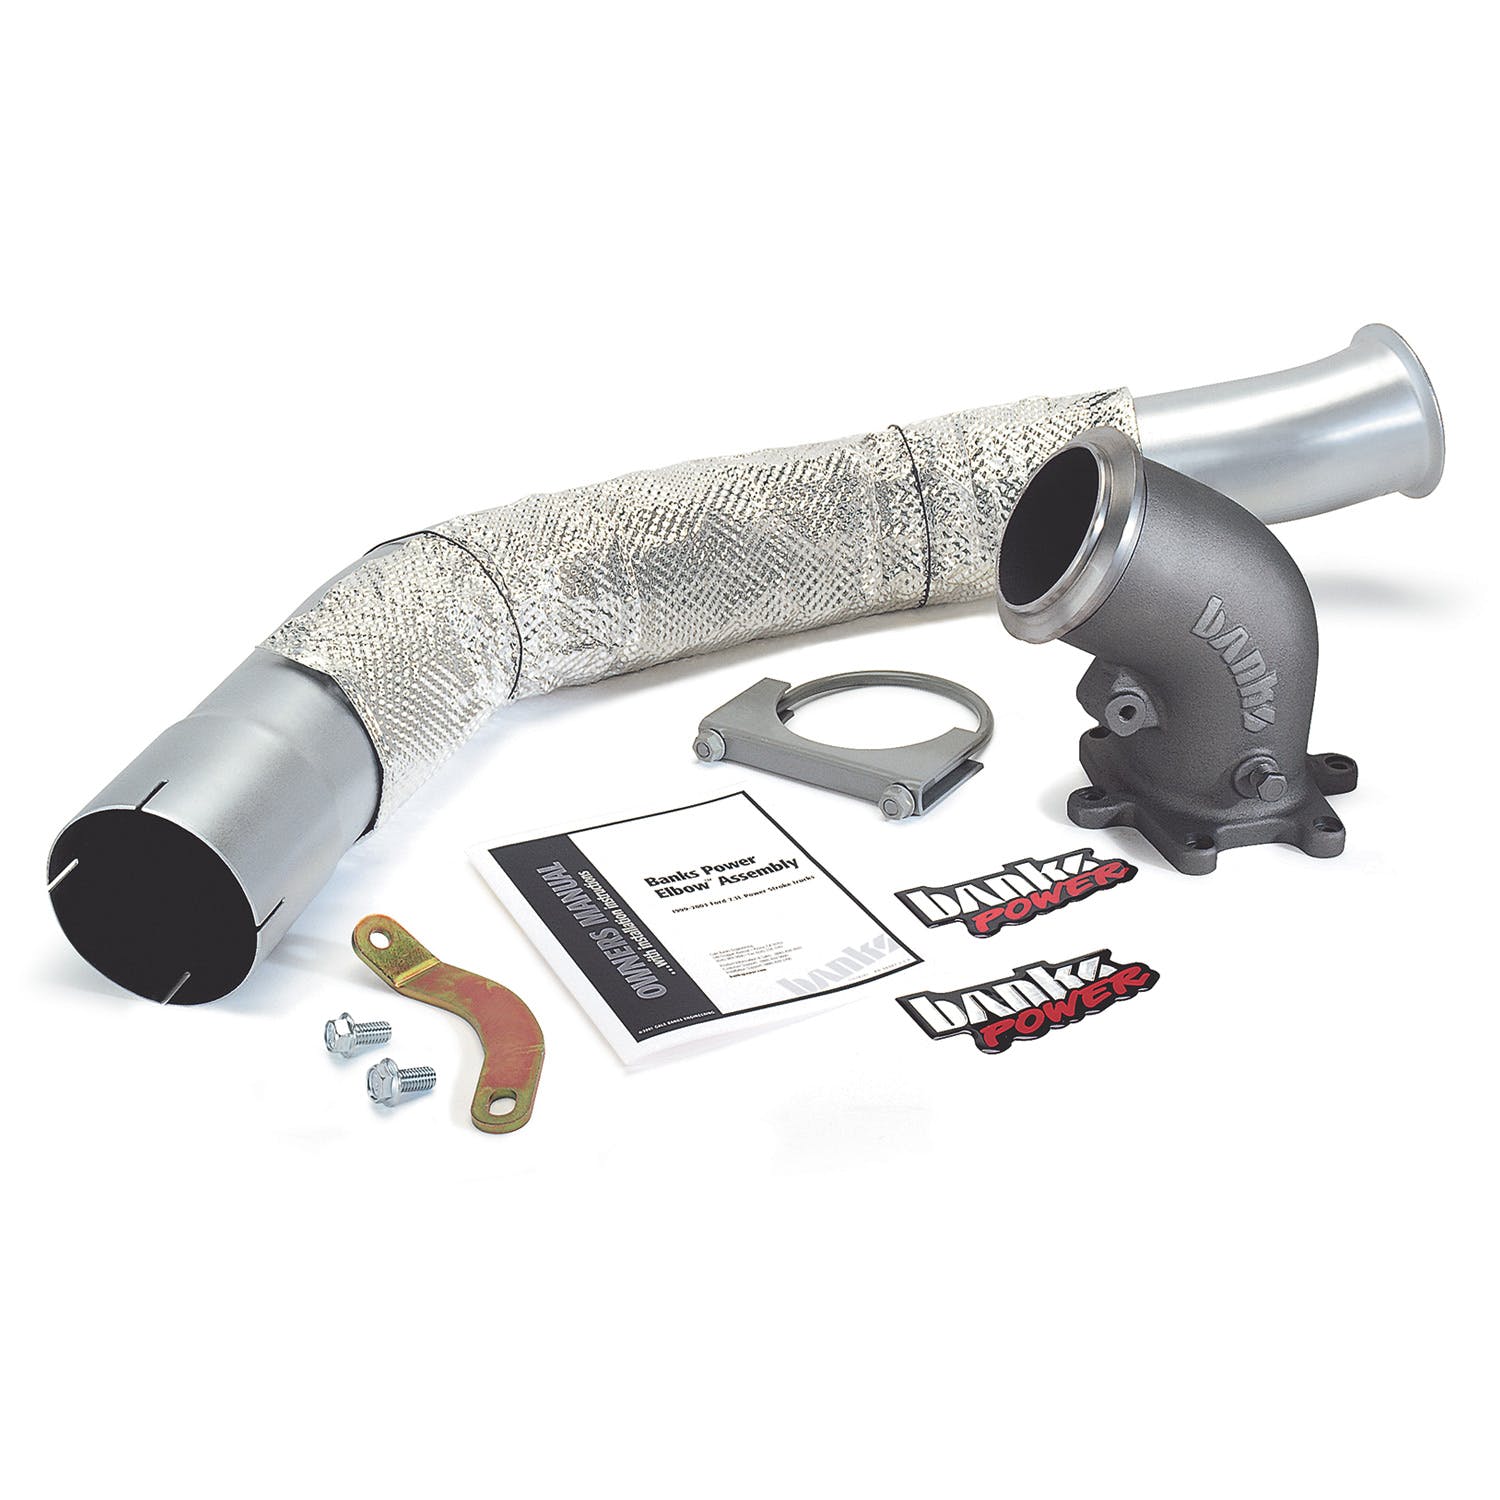 Banks Power 48662 Power Elbow Kit-1999 1/2-03 Ford 7.3L F250-350